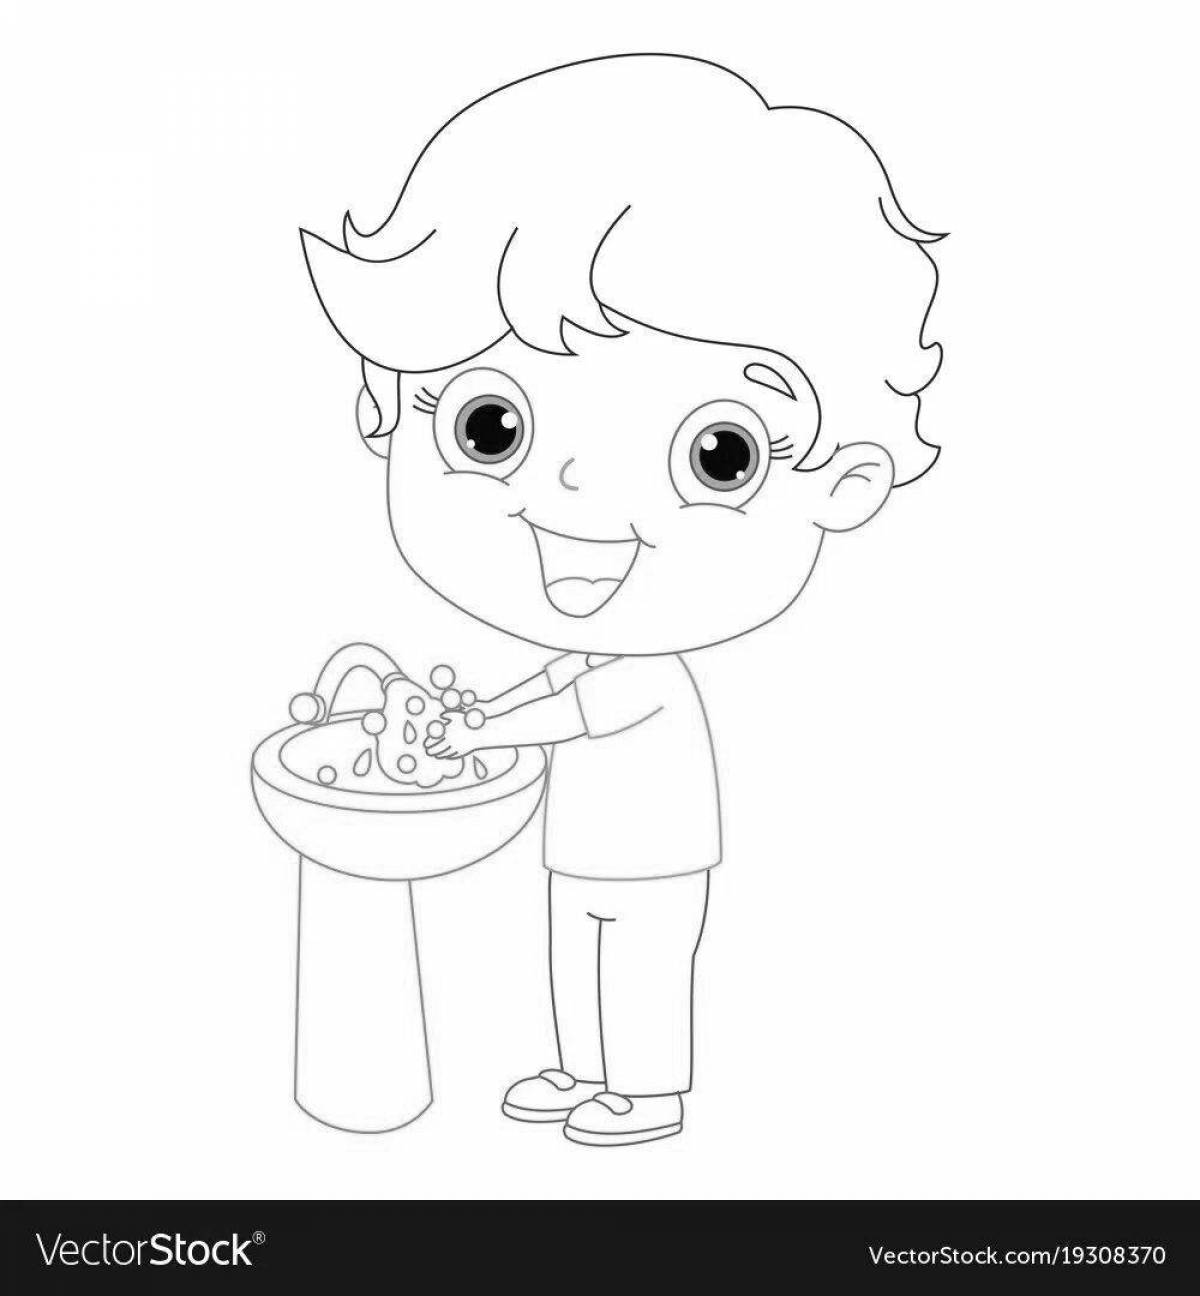 Fun i wash my face coloring page